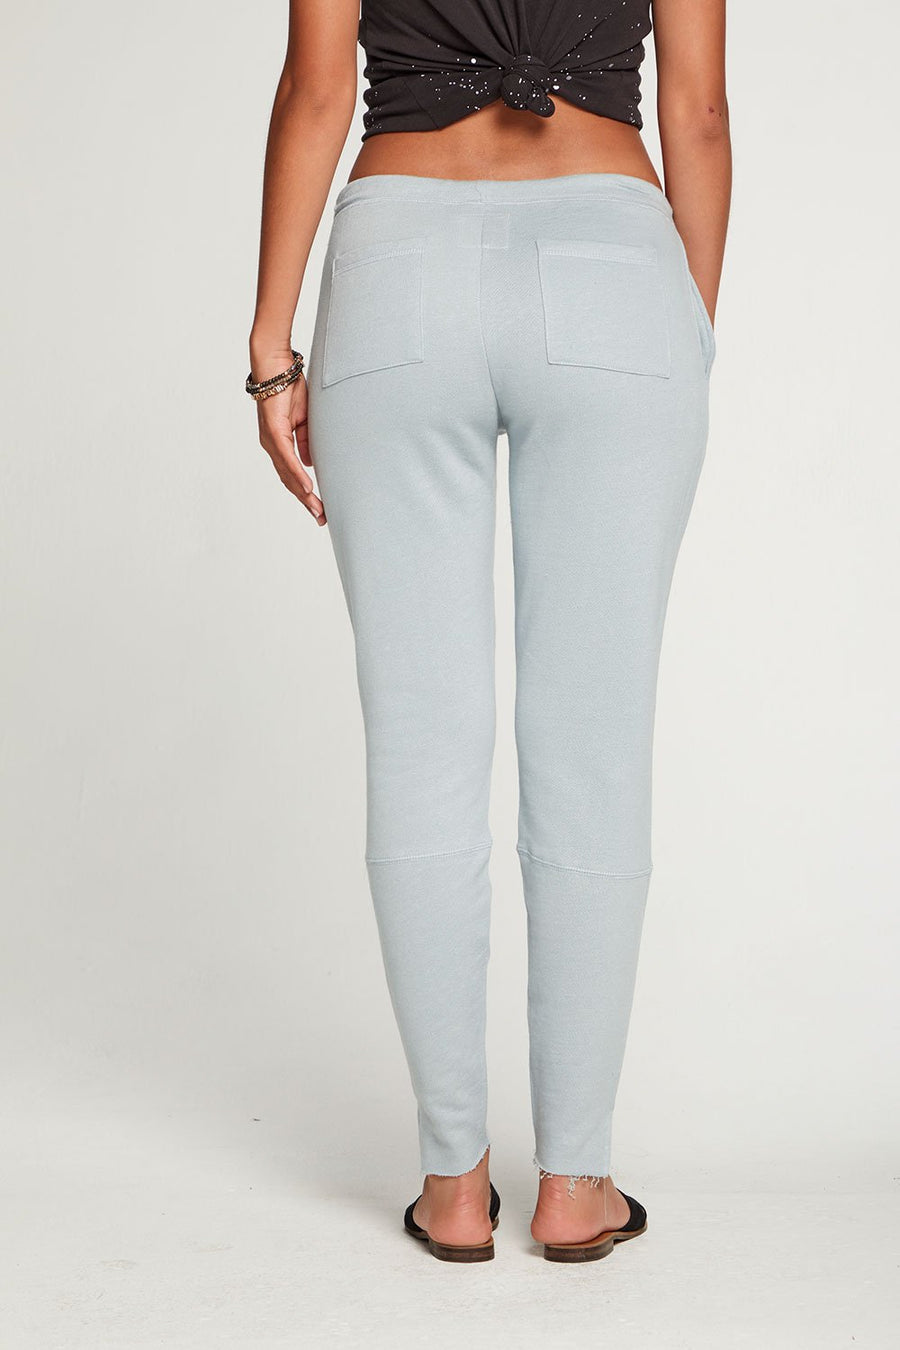 CHASER French Terry Lounge Pant